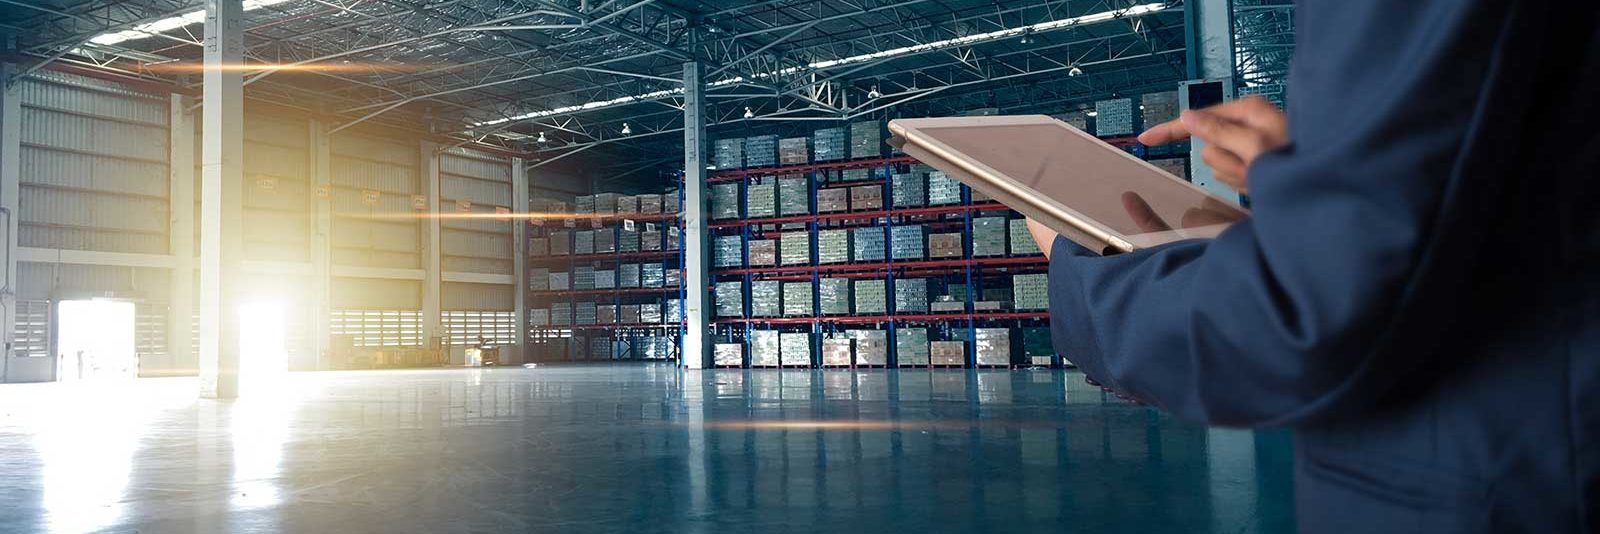 Organizational Leader Trying To Improve Warehouse Management Featured Image